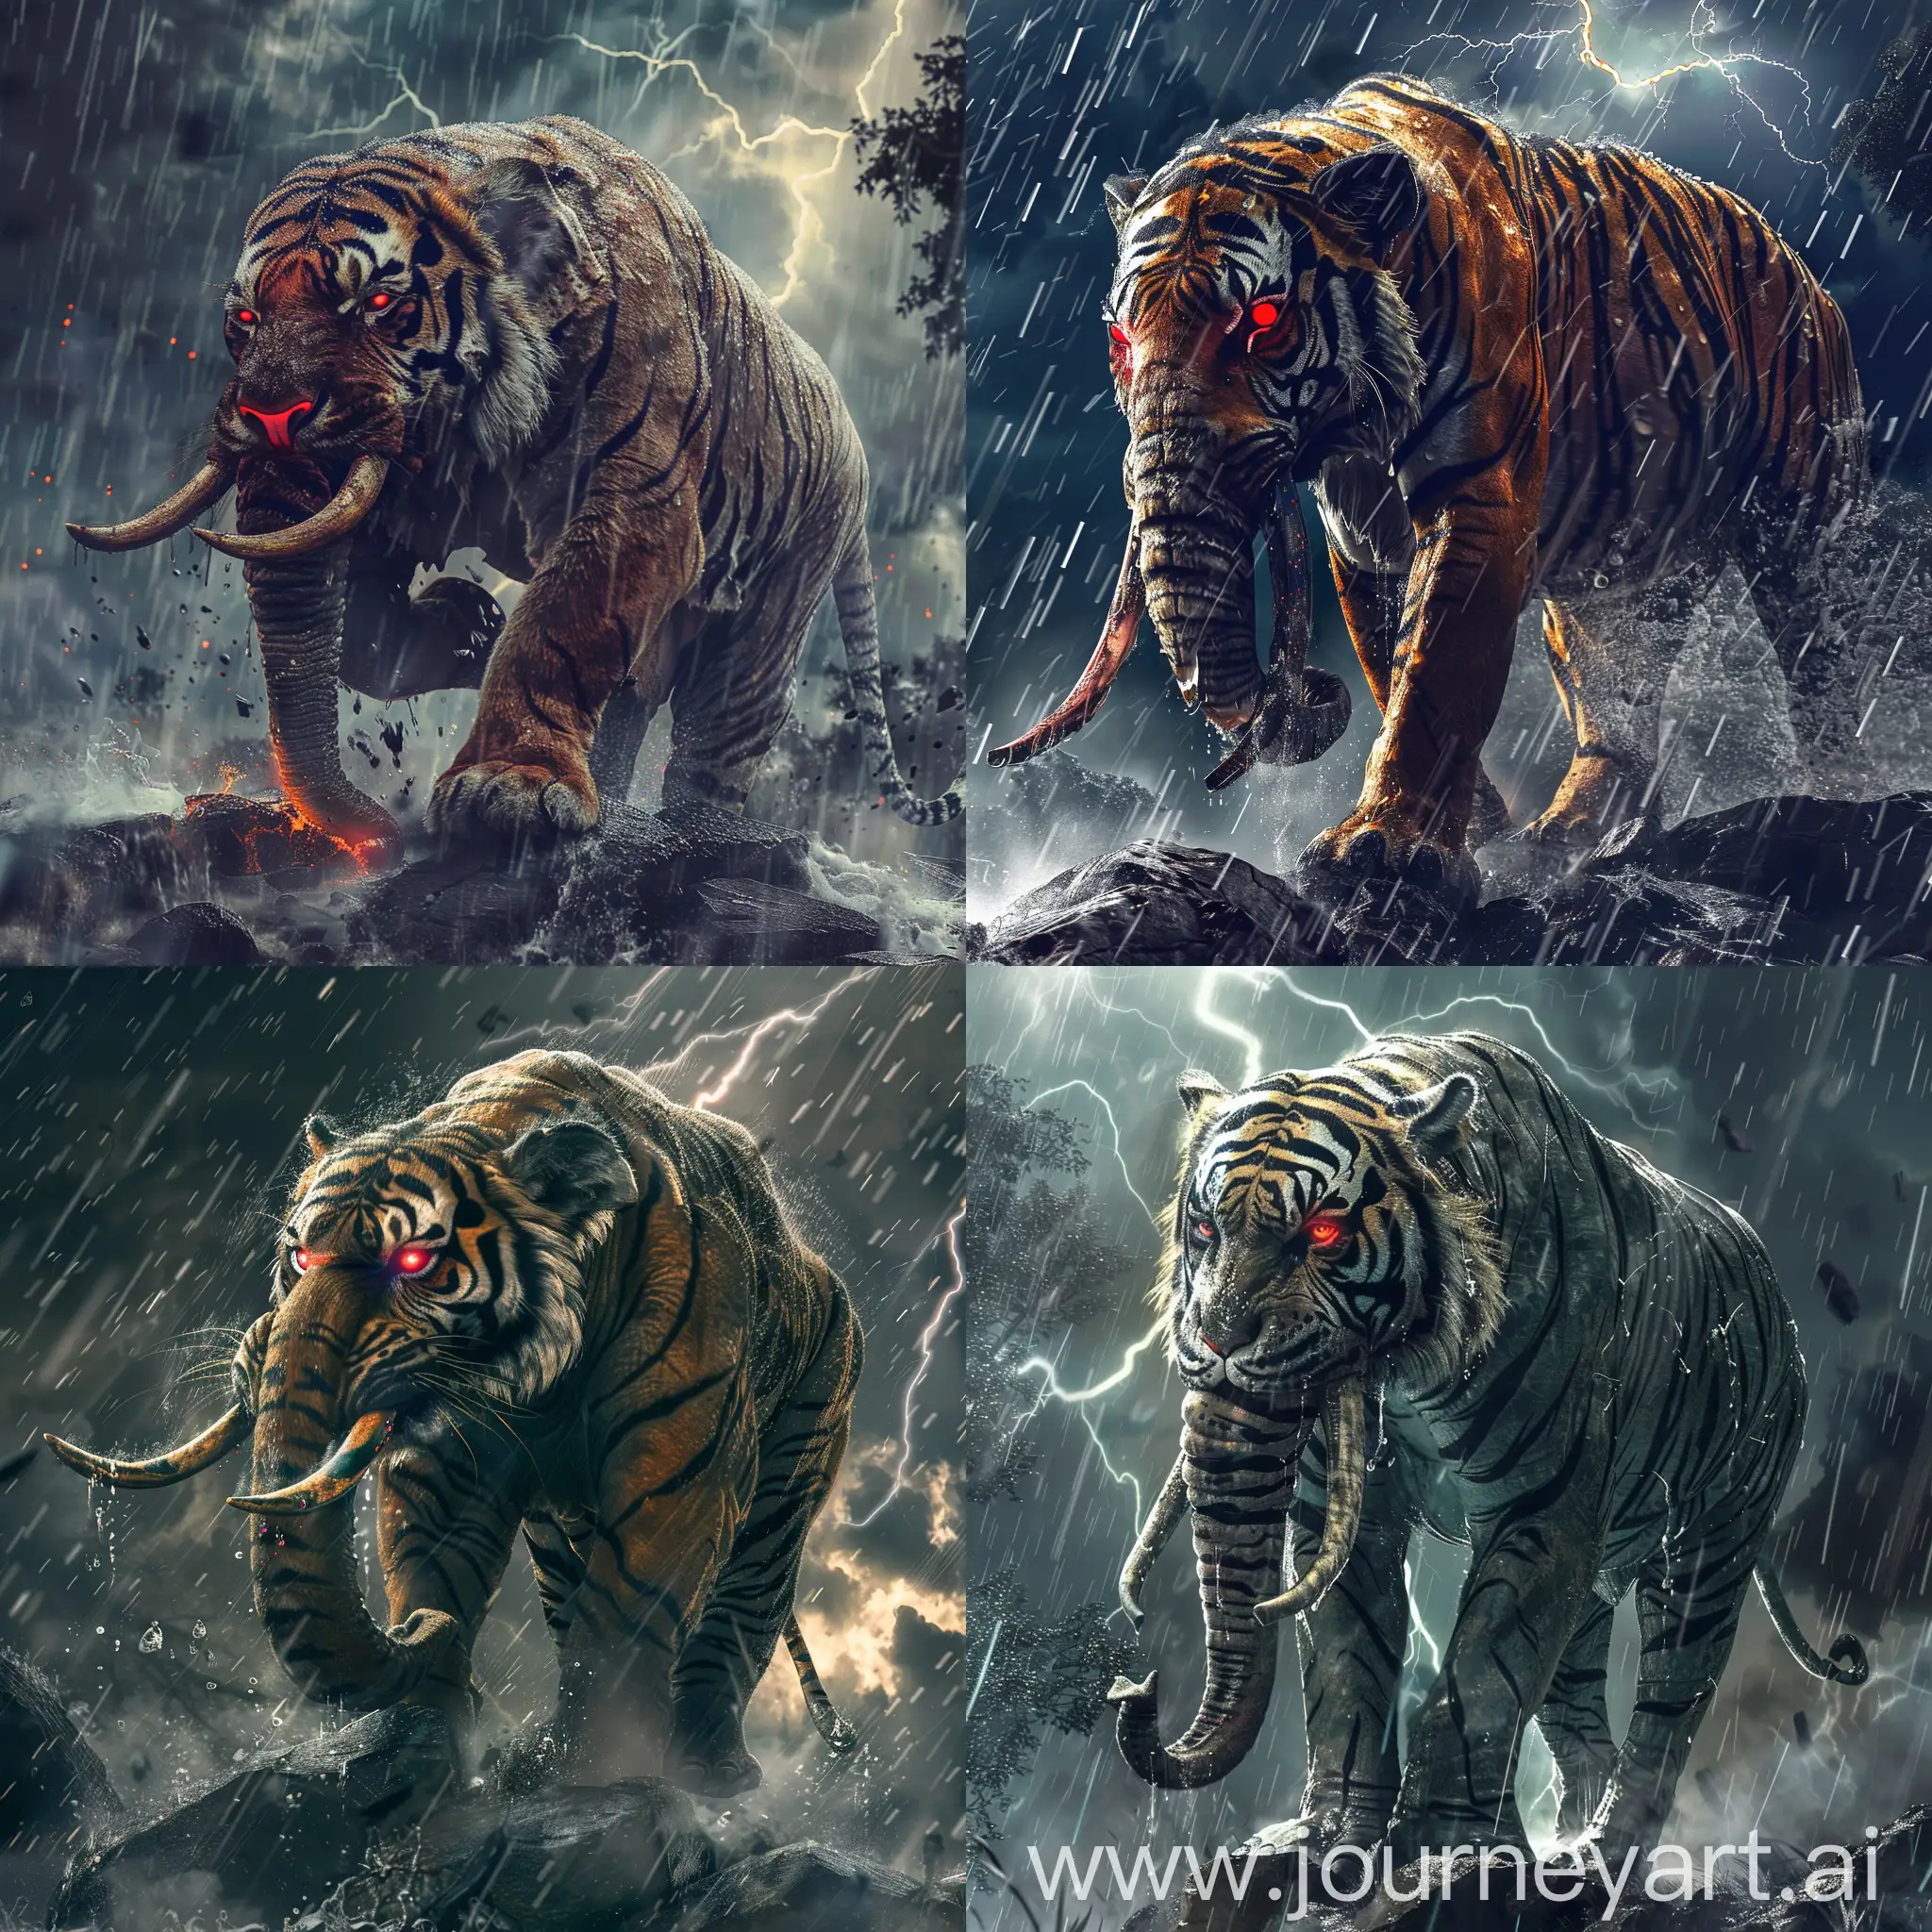 A creature half wild tiger, half elephant, red eyes, Standing on rock in rainy weather and thunderstorms, cinematic